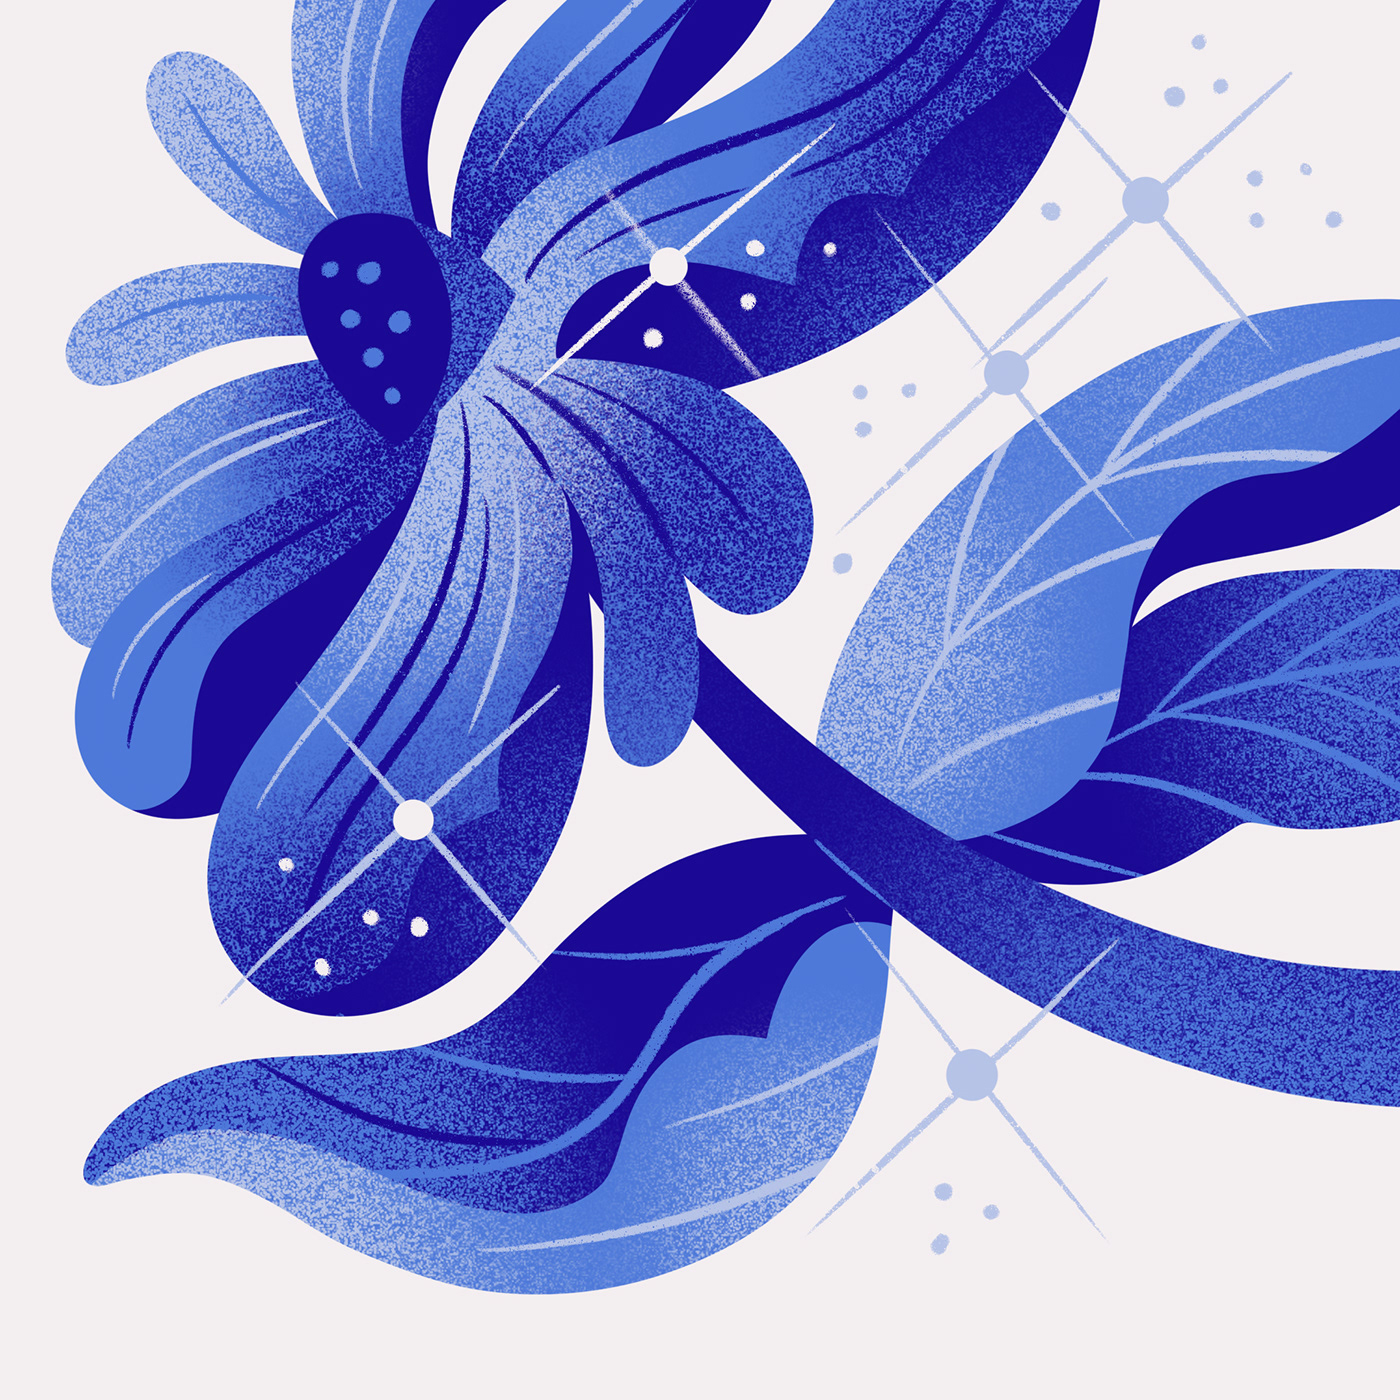 Illustration using noise texture of a spring blossom in monochromatic blue, surrounded by stars and 